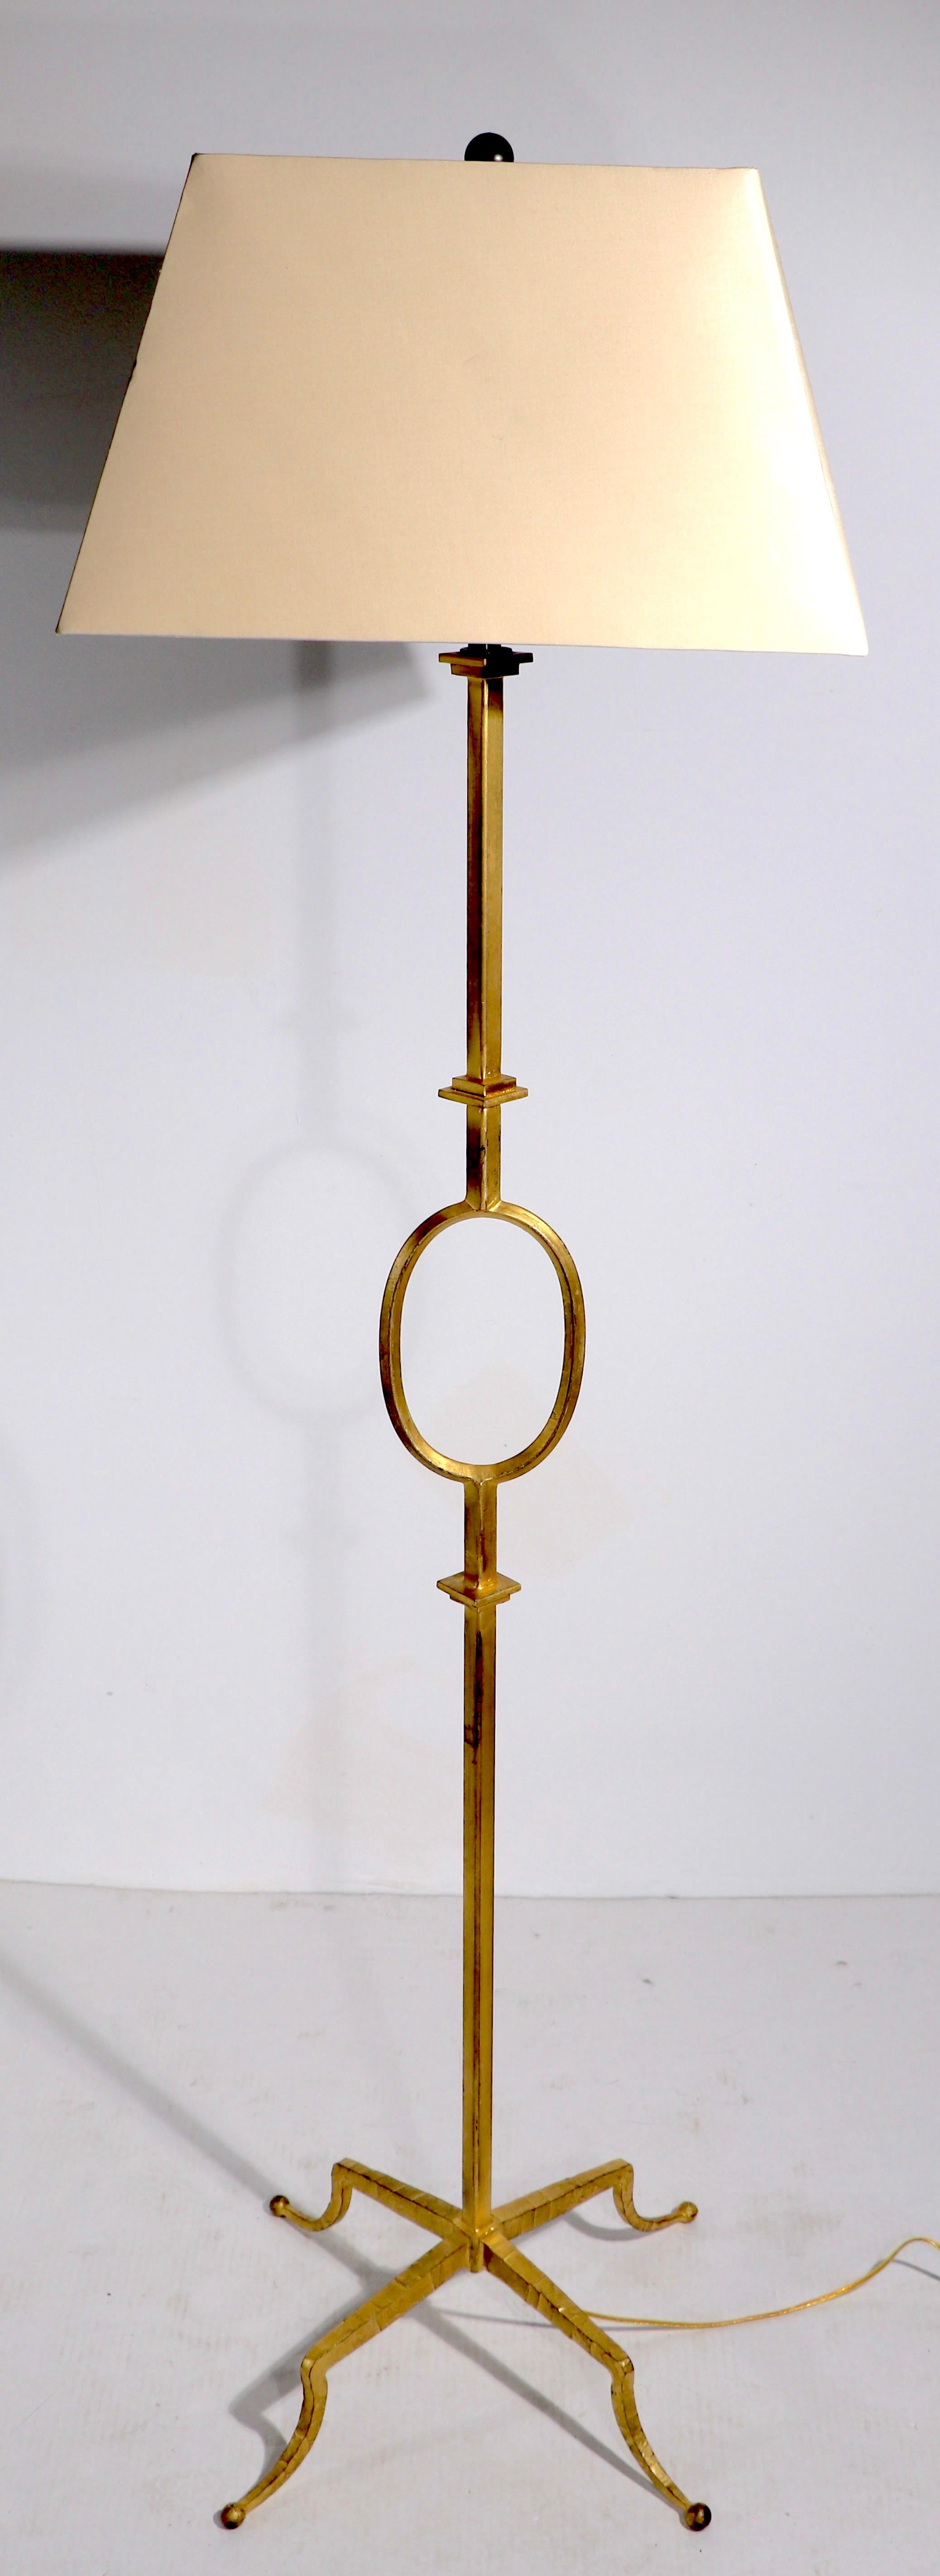 Stylish floor lamp in the style of Gilbert Poillerat. The lamp has a gold pint finish, over hand wrought iron on four legs base. In very good, clean, original and working condition, shade not included. Probably American made in the French style,